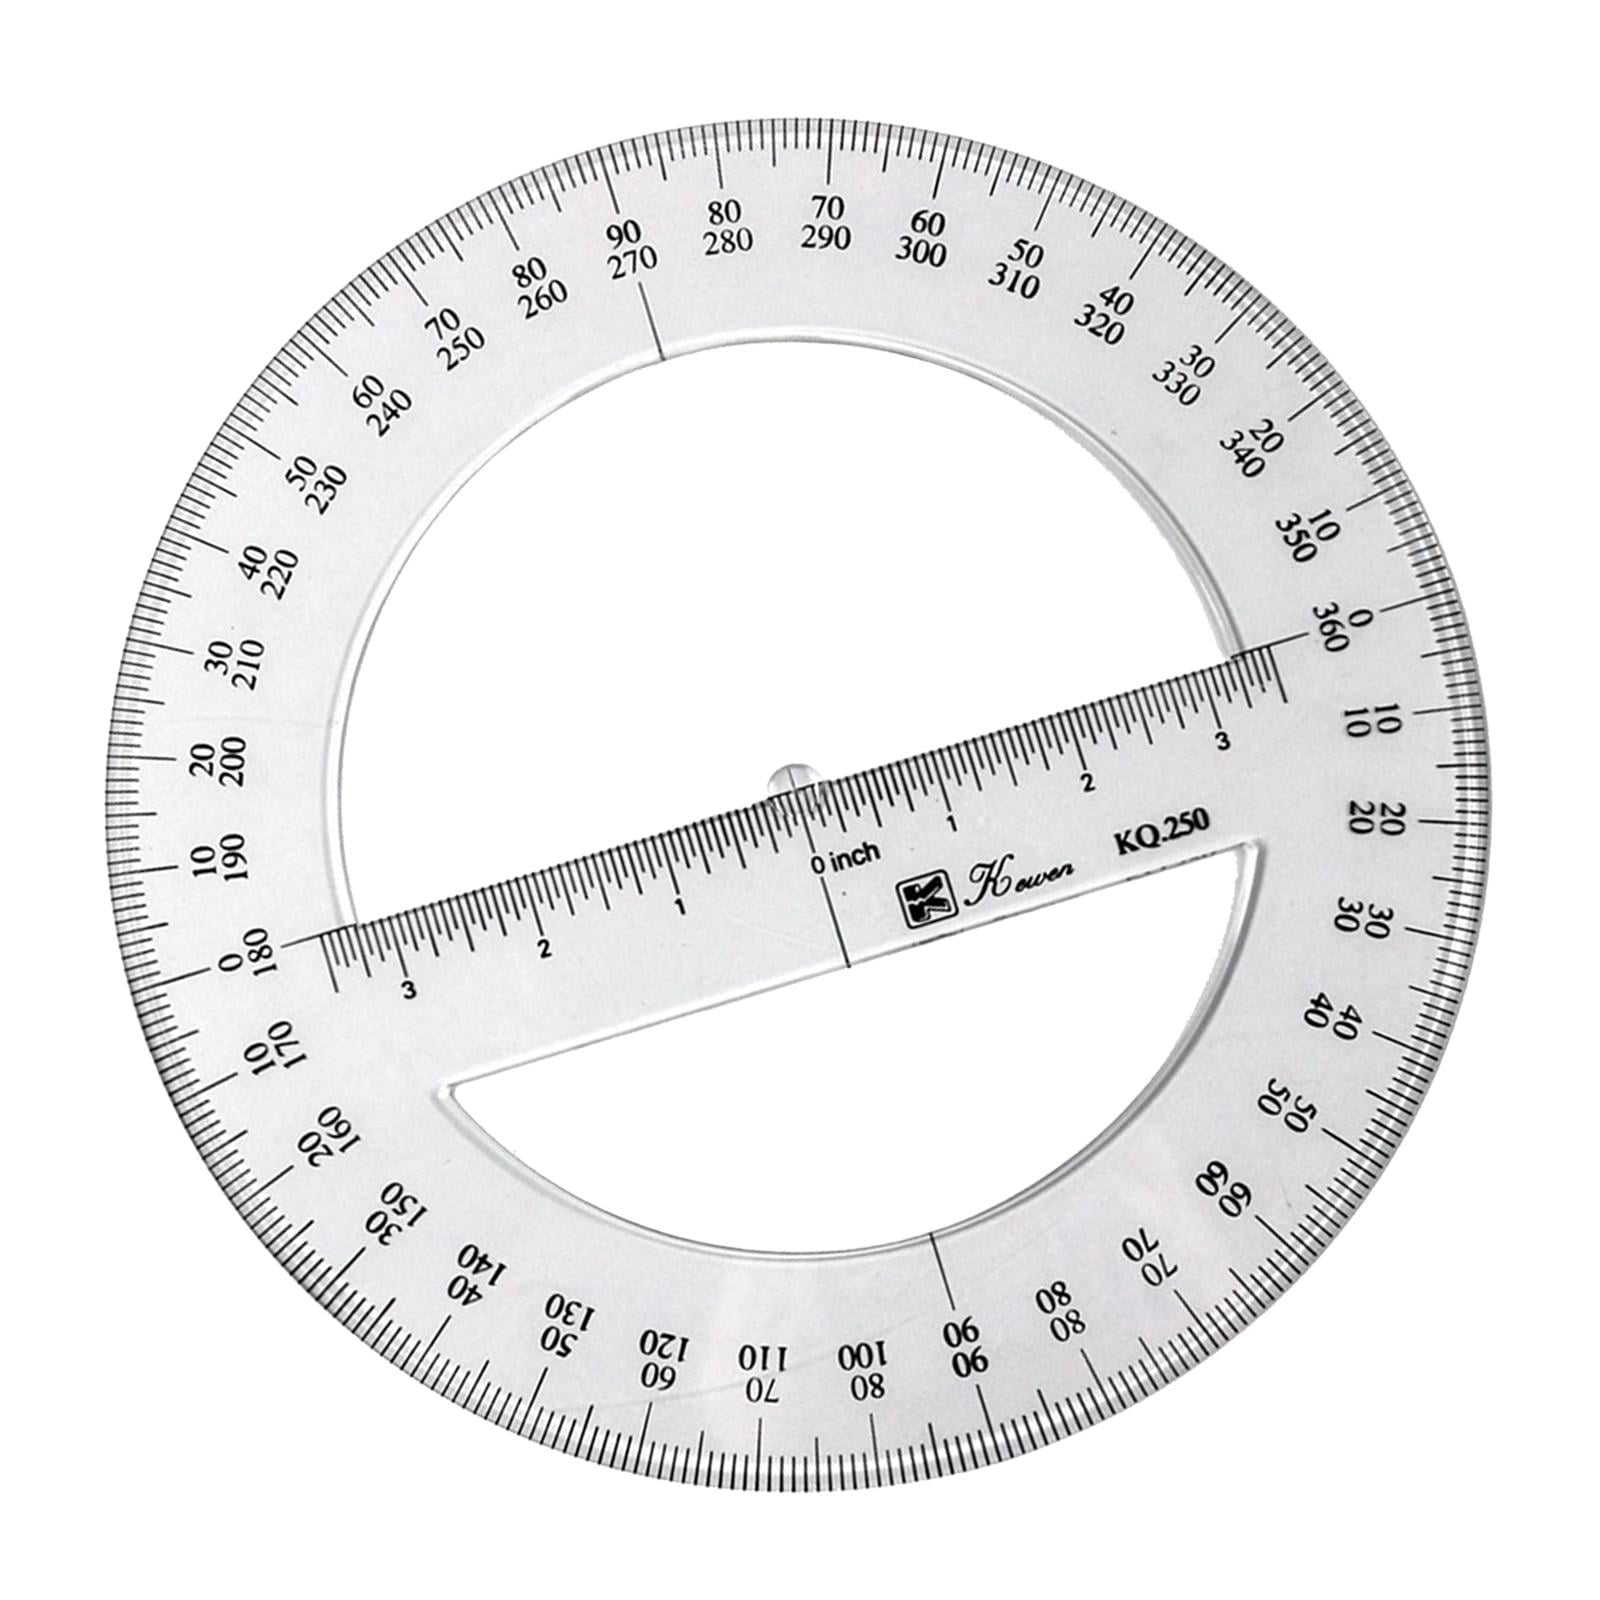 OBOSOE 360 Degree Protractor 1 Piece, Transparent Circle Maker 4.25 inch, Protractor Measuring Tool for Angle Measurement Making Circles School Student